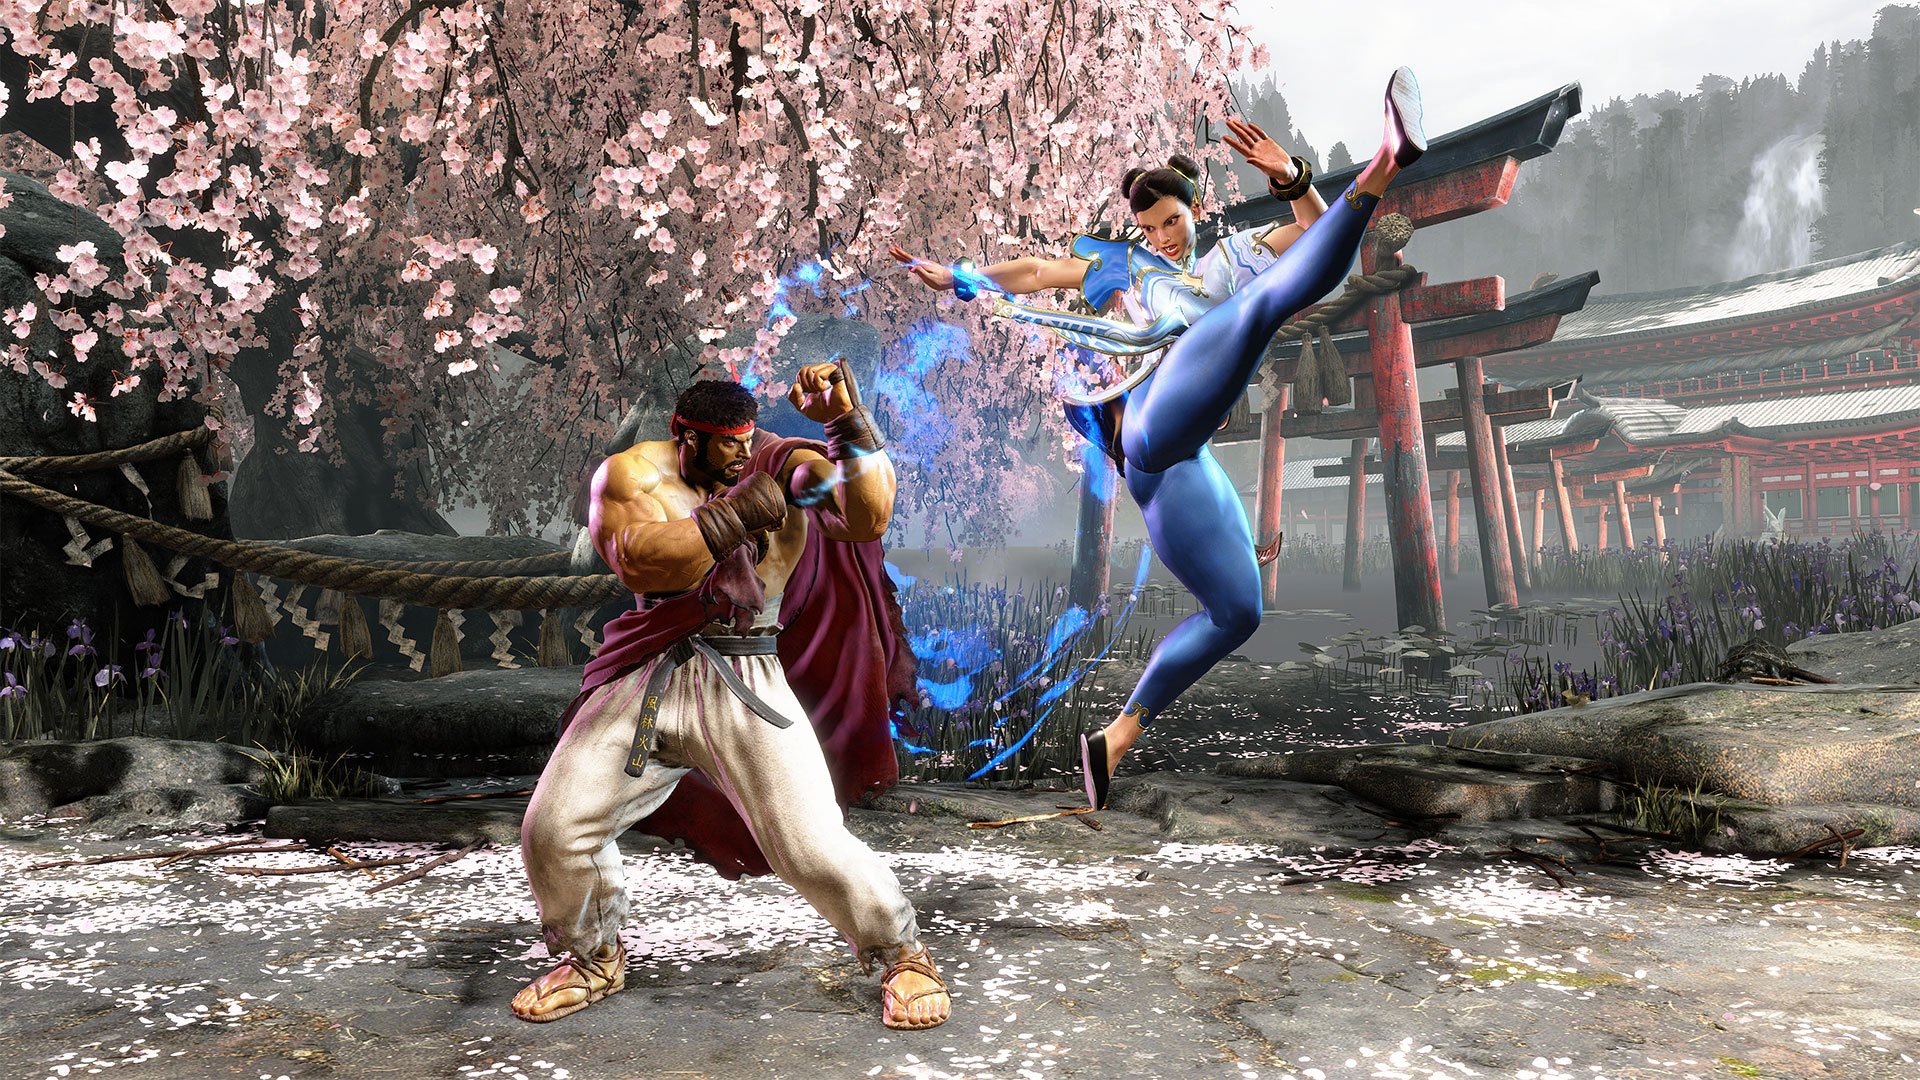 Tekken 8 Director Confirms the Game Won't Feature Denuvo on PC